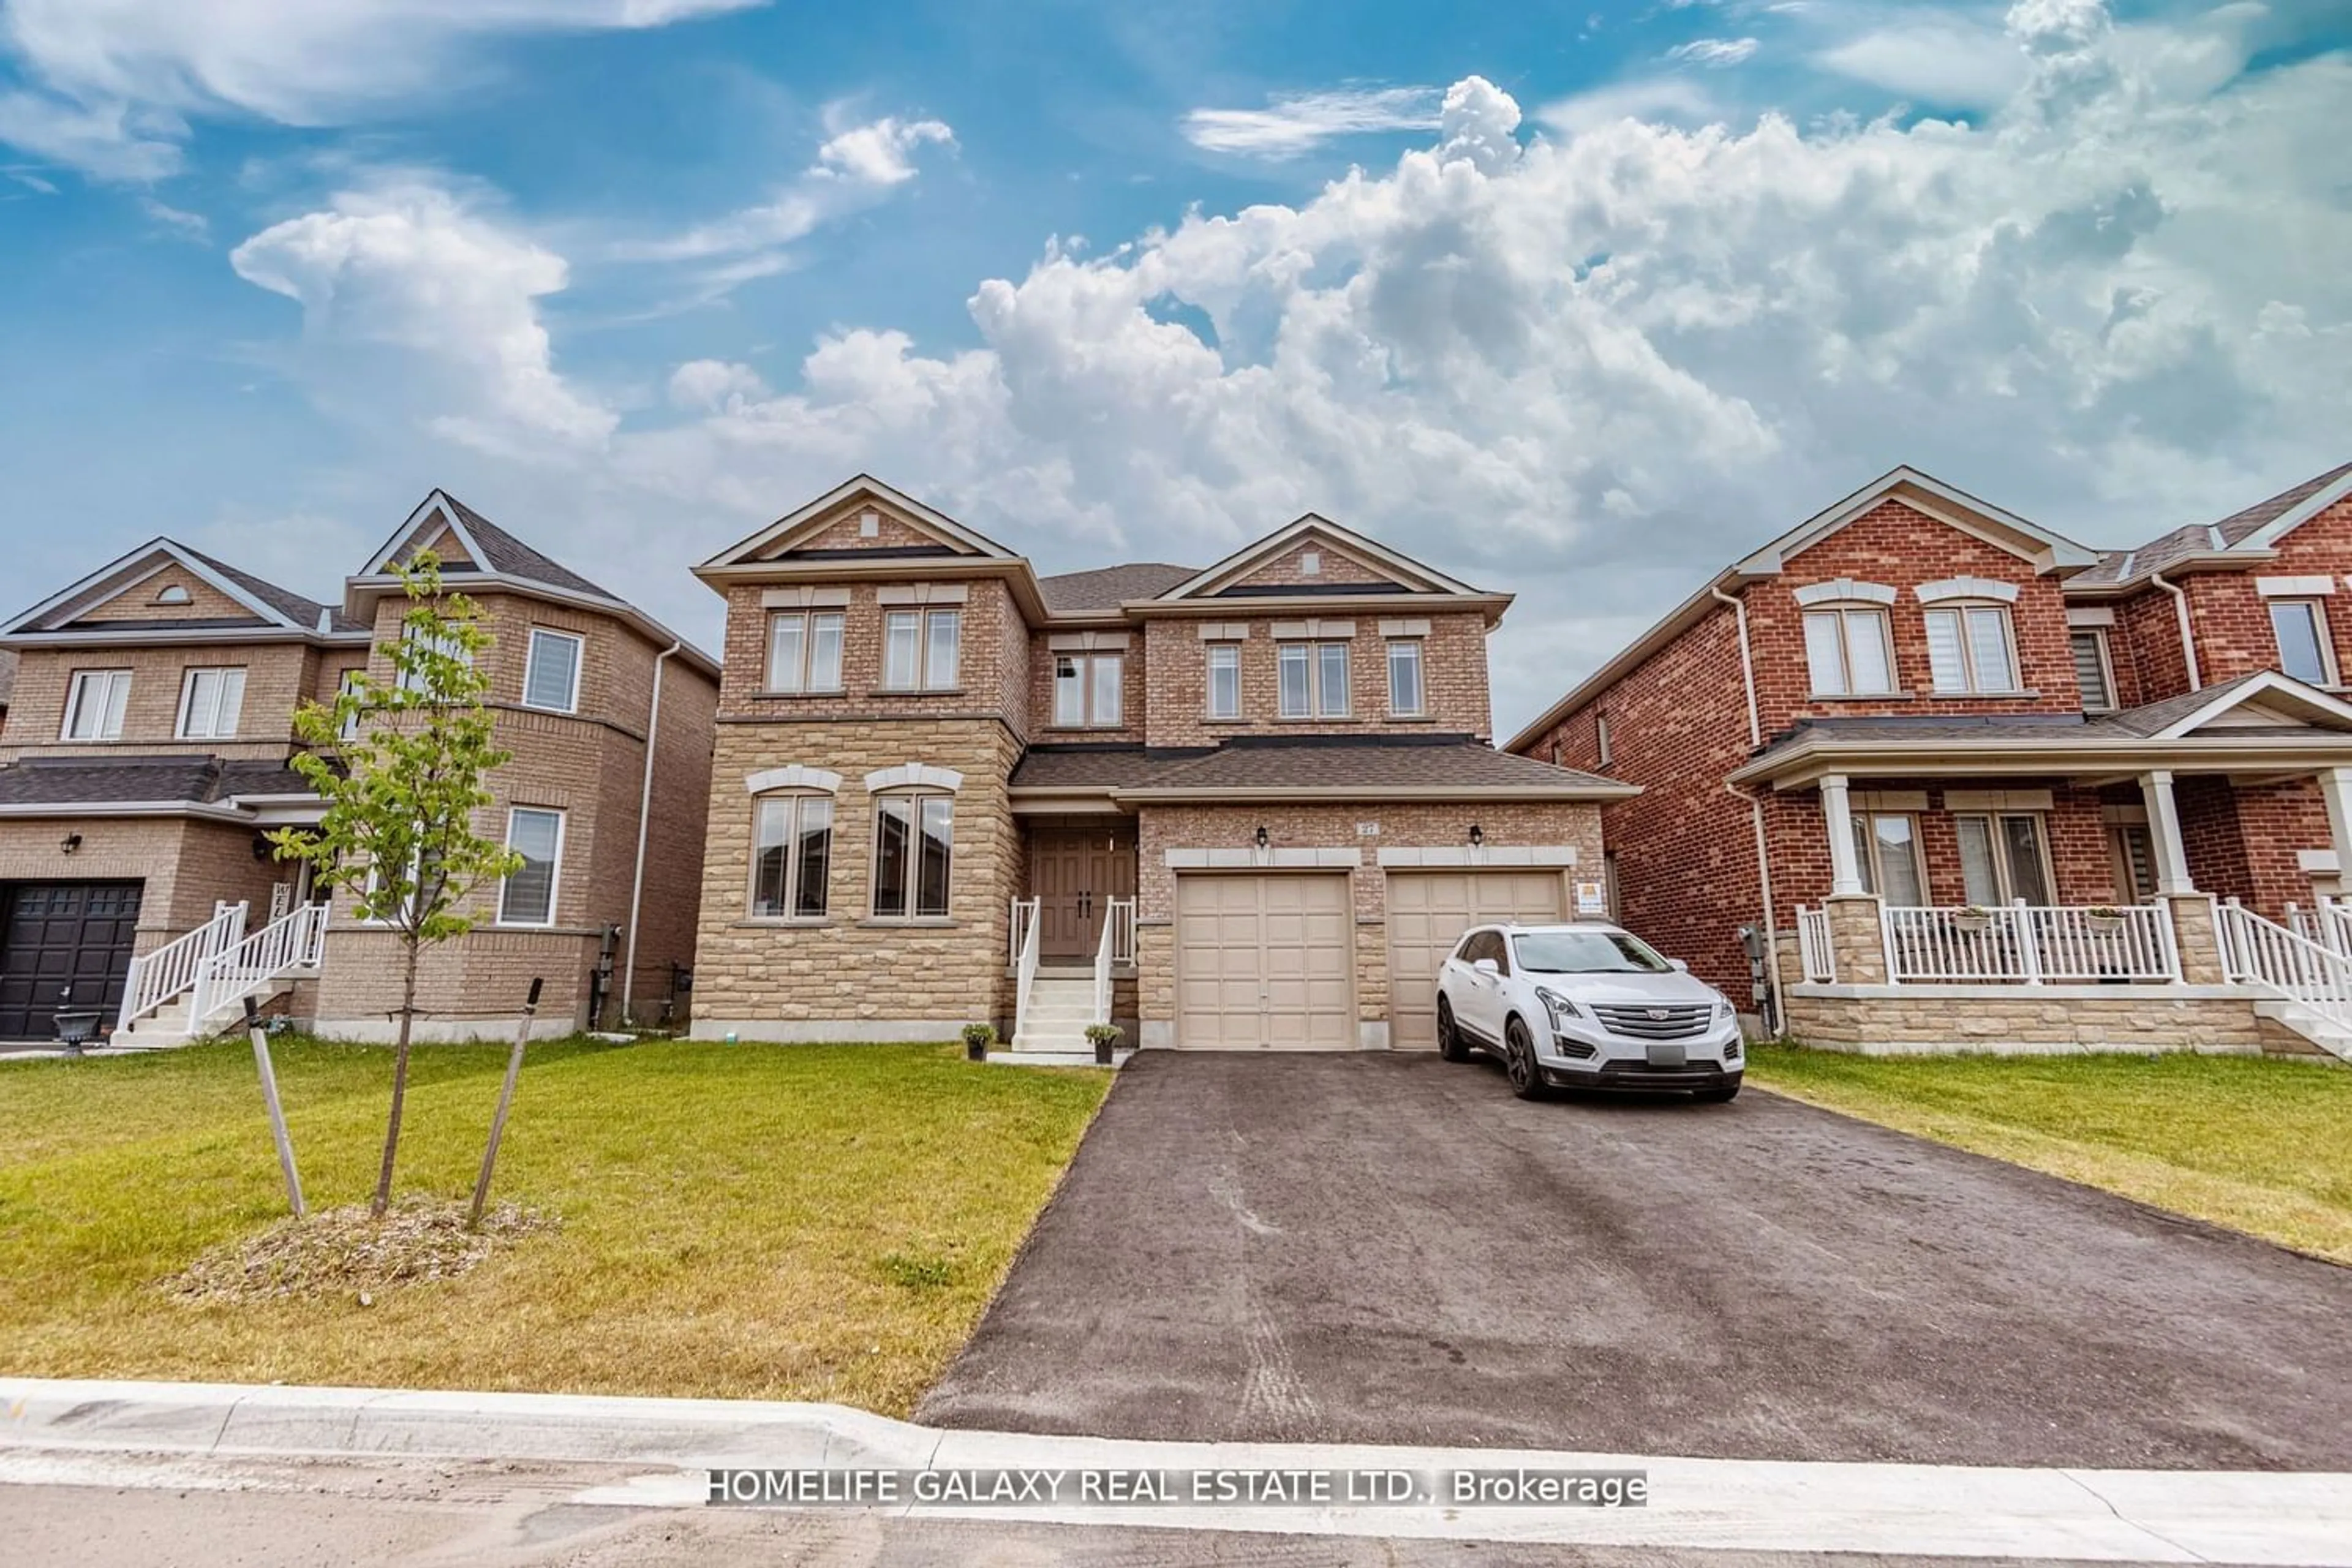 Home with brick exterior material for 27 Mccaskell St, Brock Ontario L0K 1A0